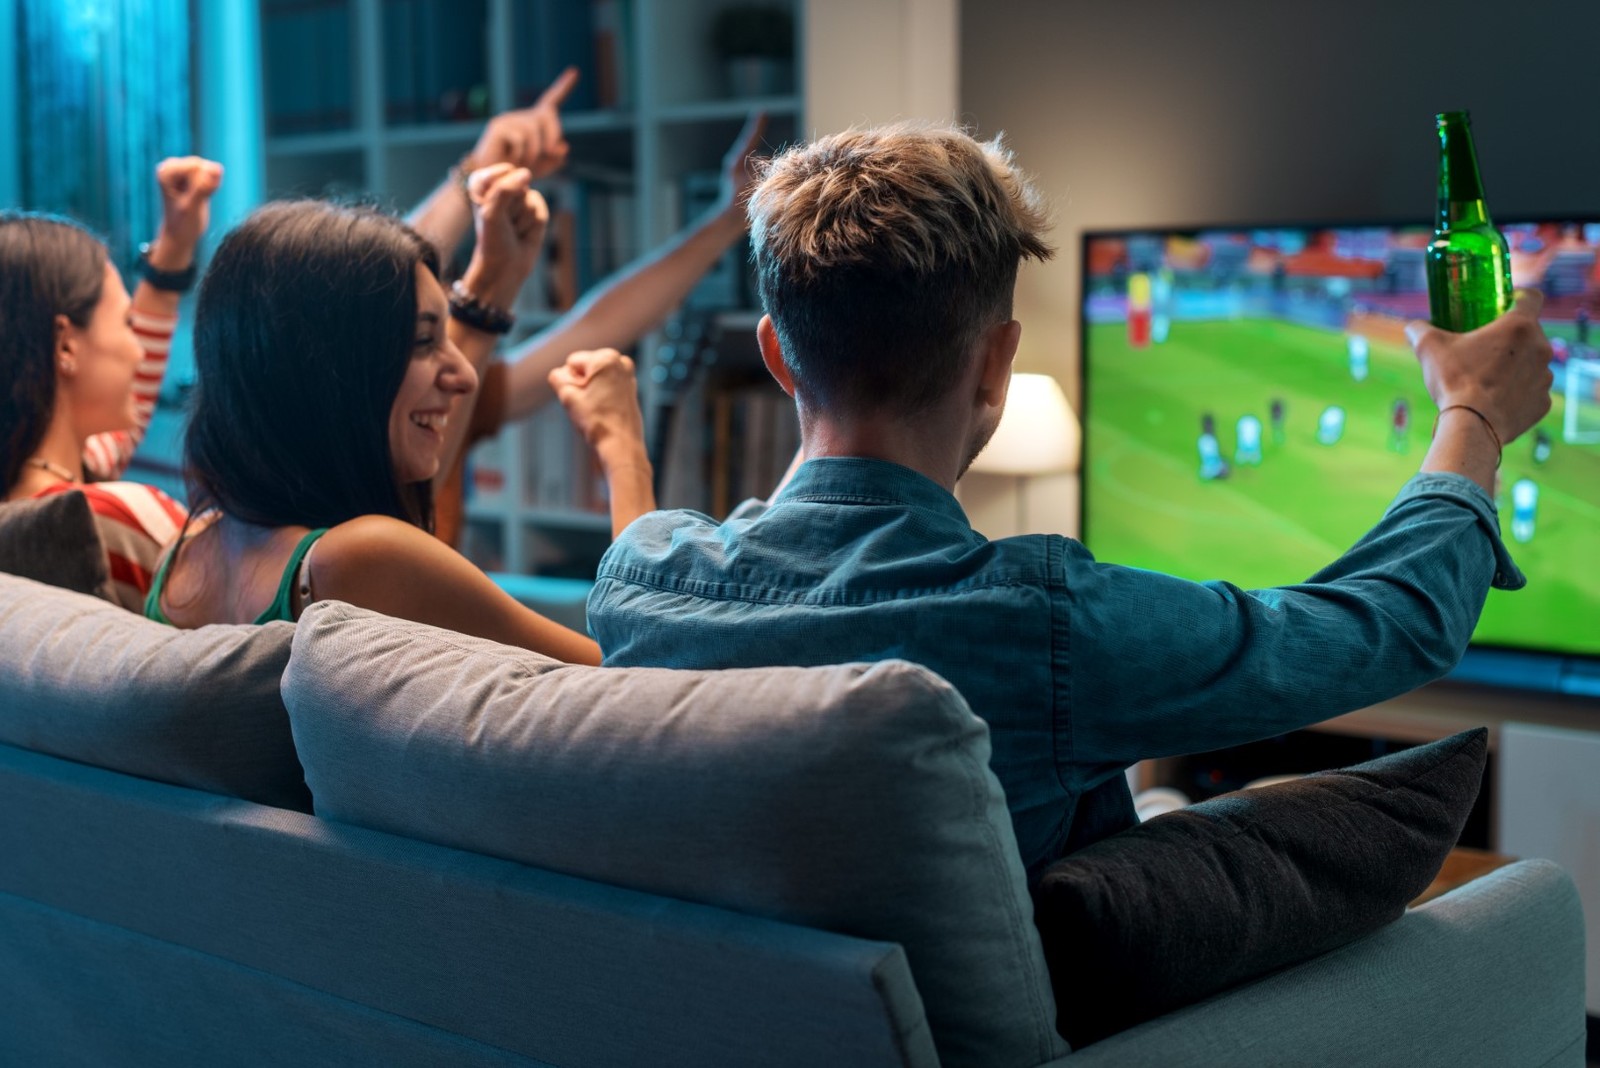 Group of young friends watching a football match on TV together and cheering for their team
